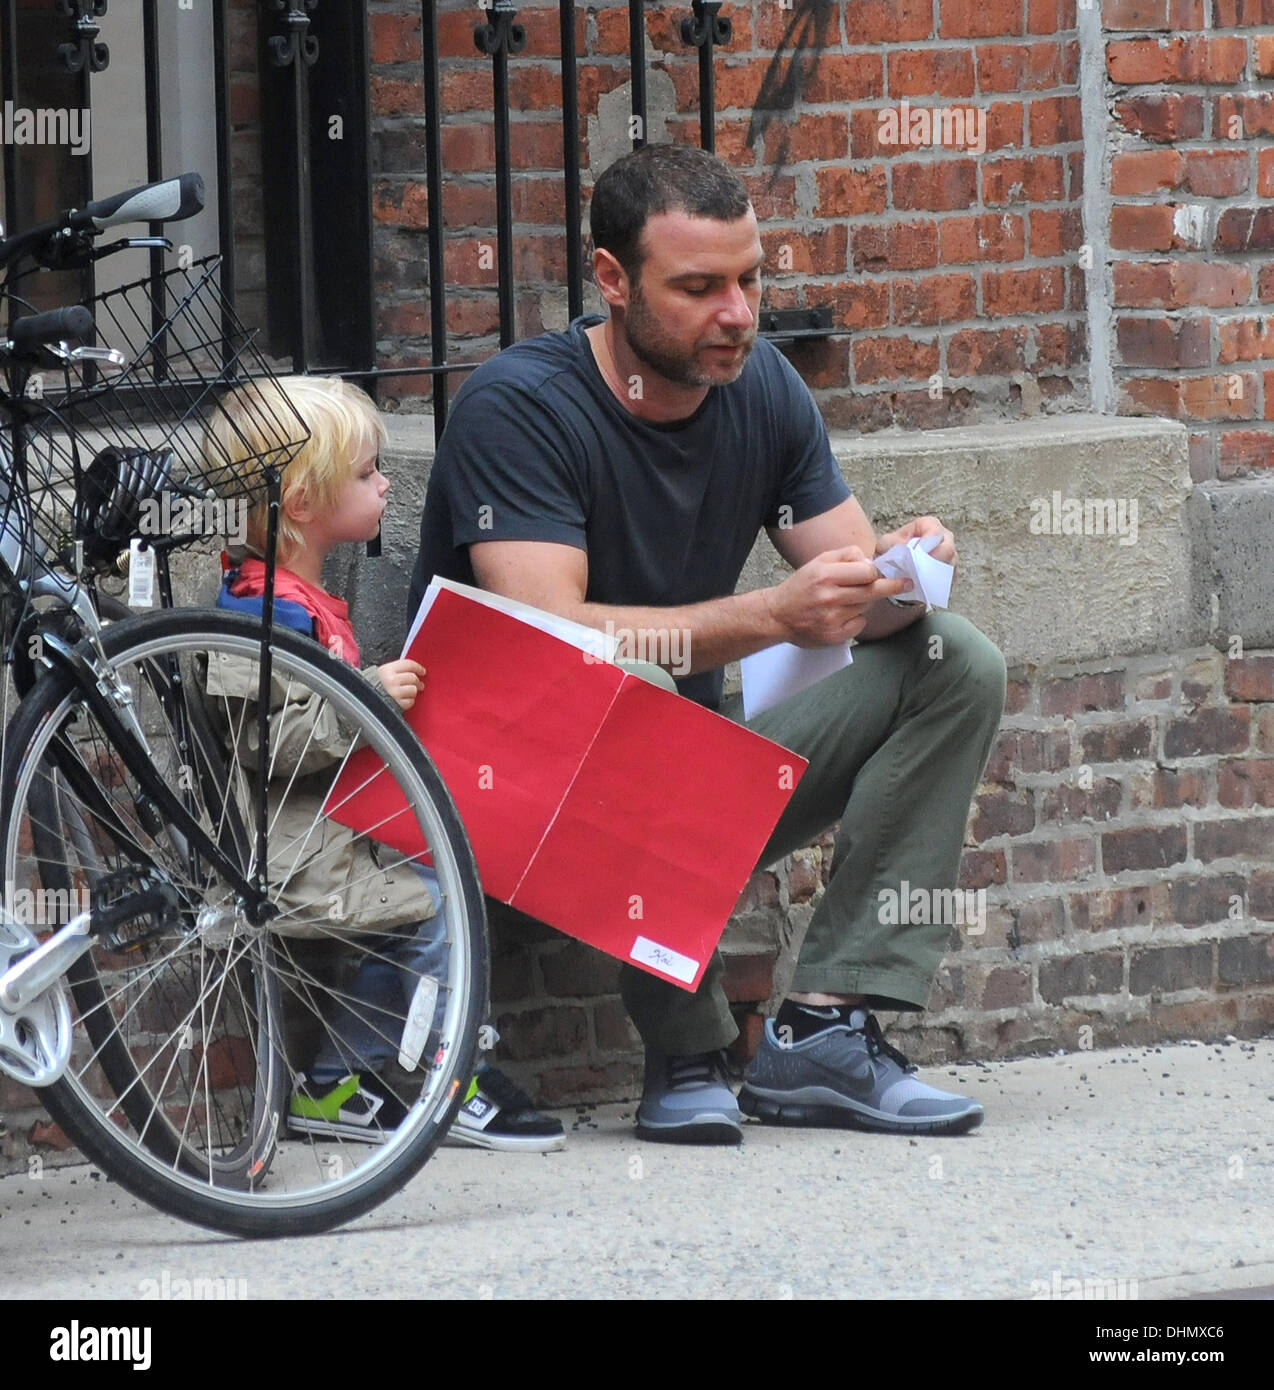 Liev Schreiber reads to his son outside his school in Manhattan New York City, USA - 04.05.12 Stock Photo